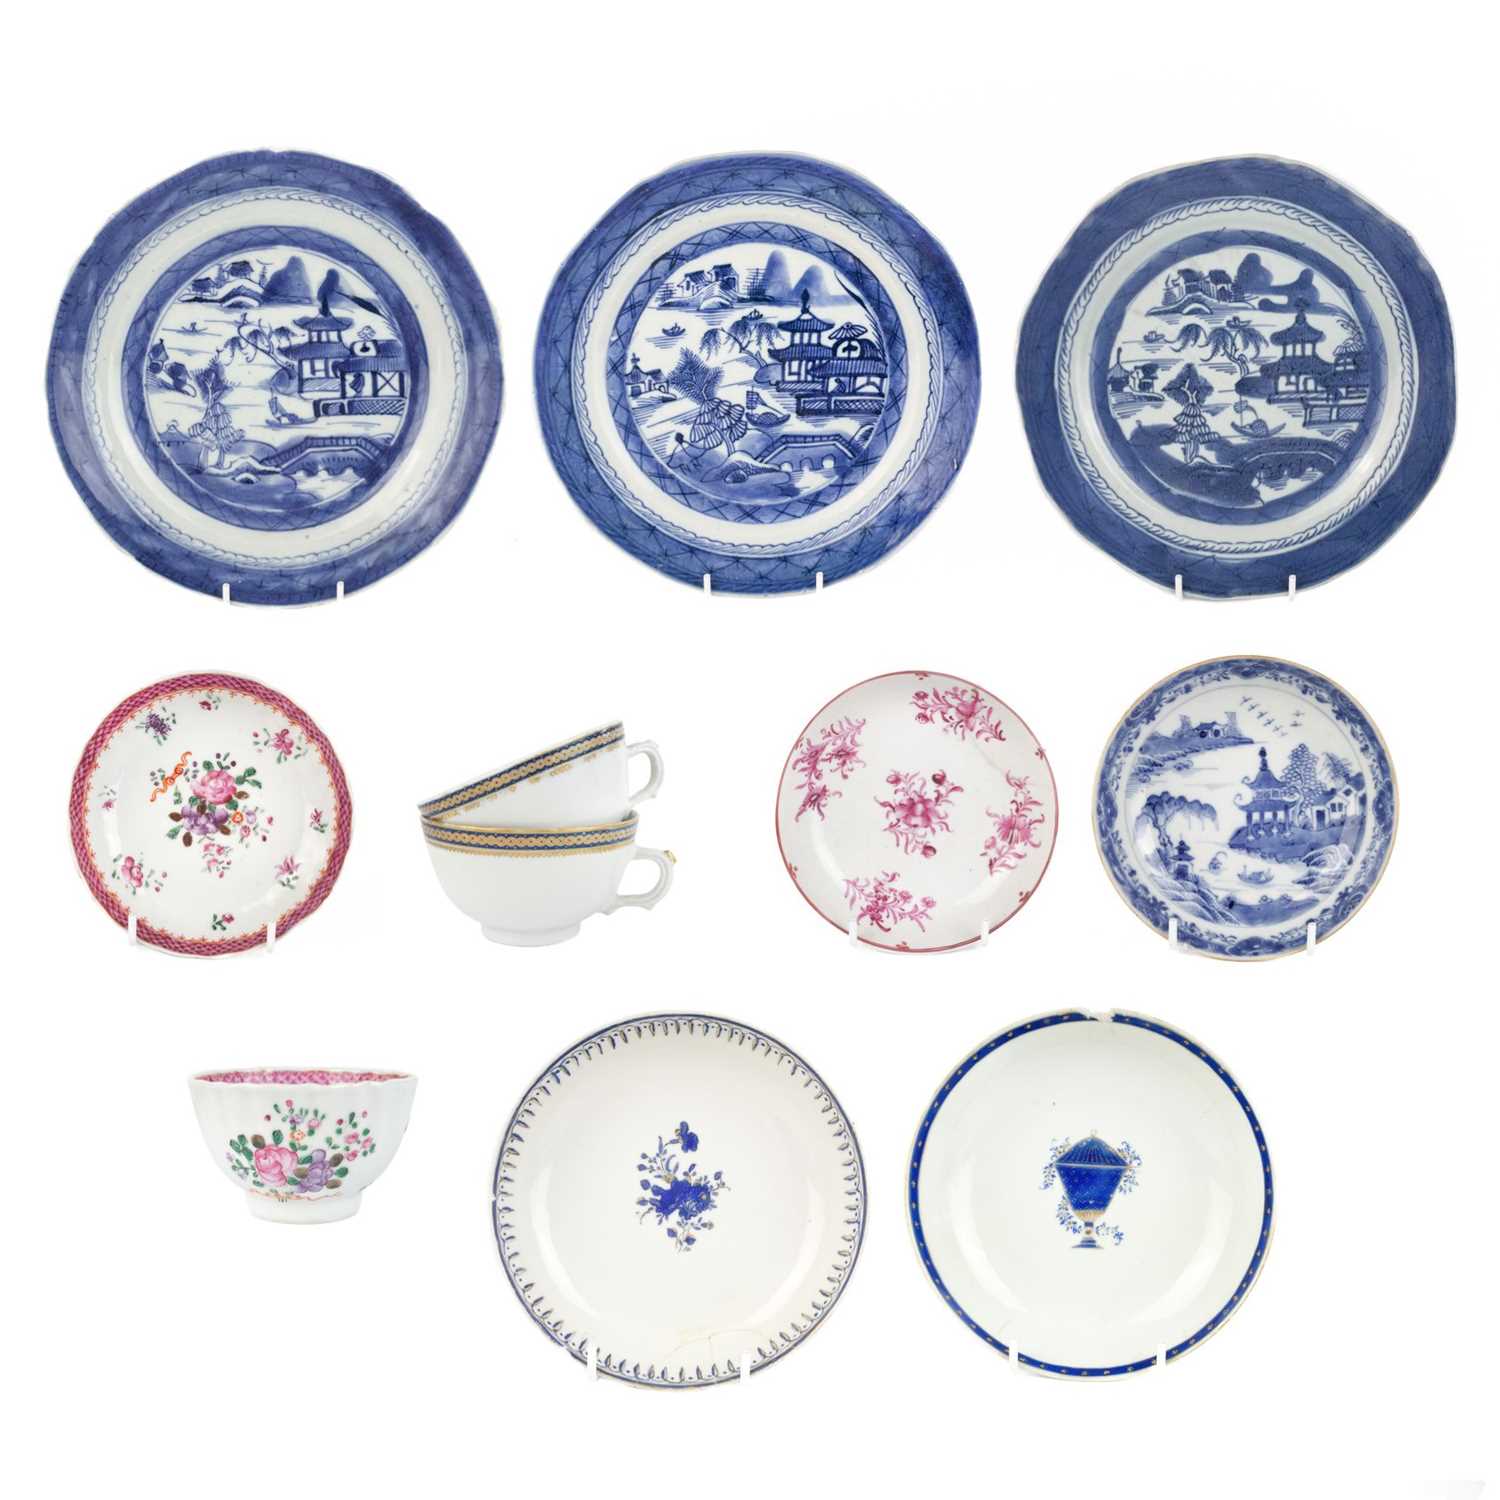 A selection of various Chinese porcelain, 18th century.